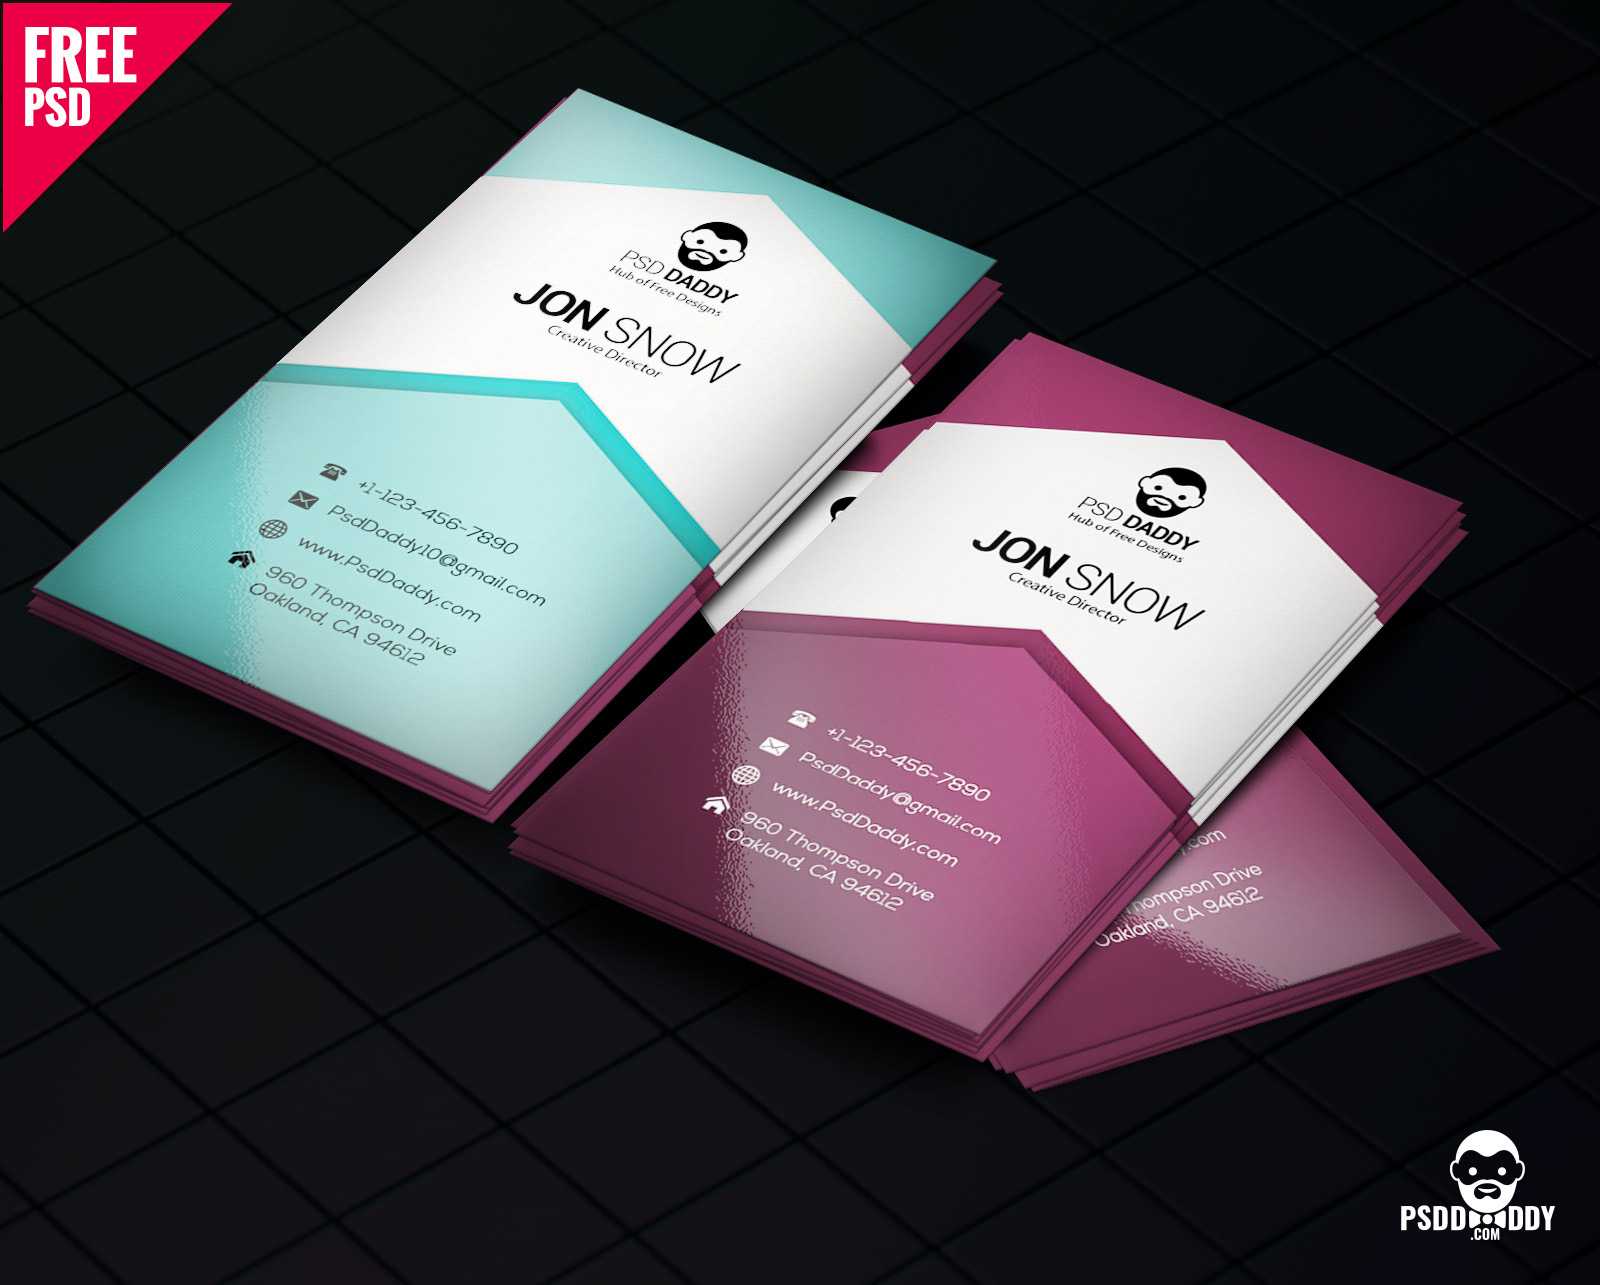 Download]Creative Business Card Psd Free | Psddaddy Pertaining To Visiting Card Templates For Photoshop